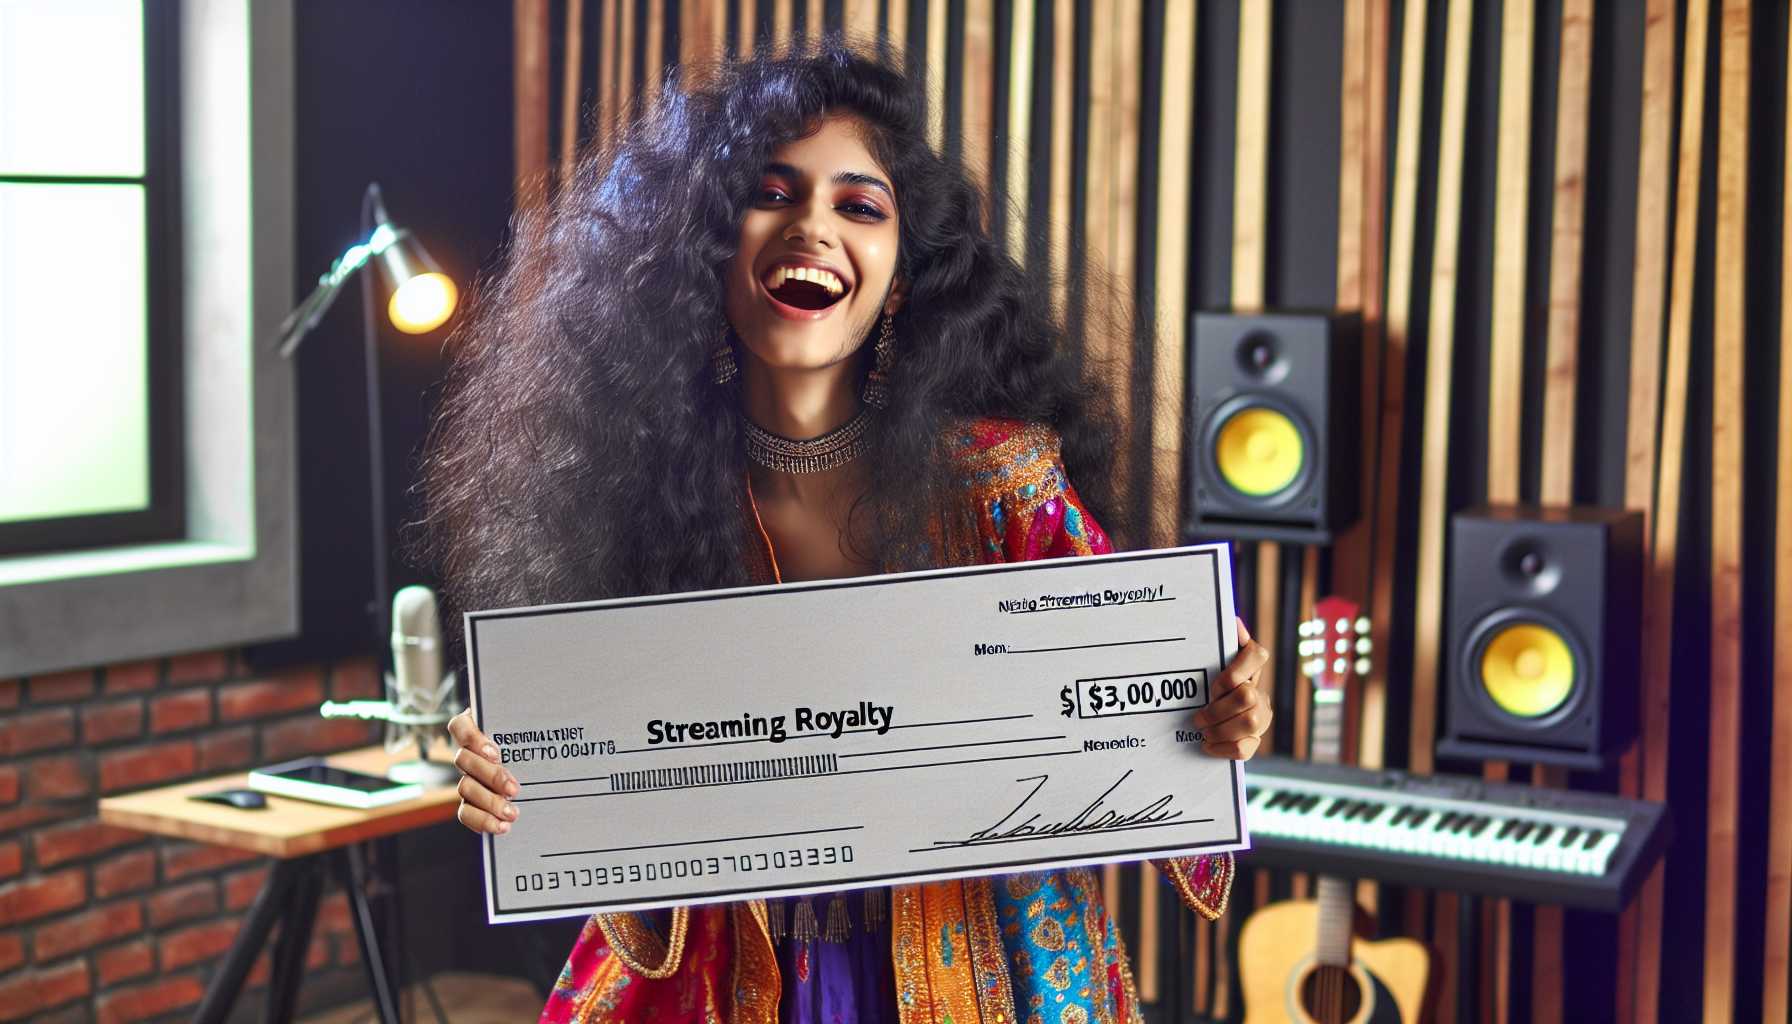 happy musician receiving a streaming royalty check